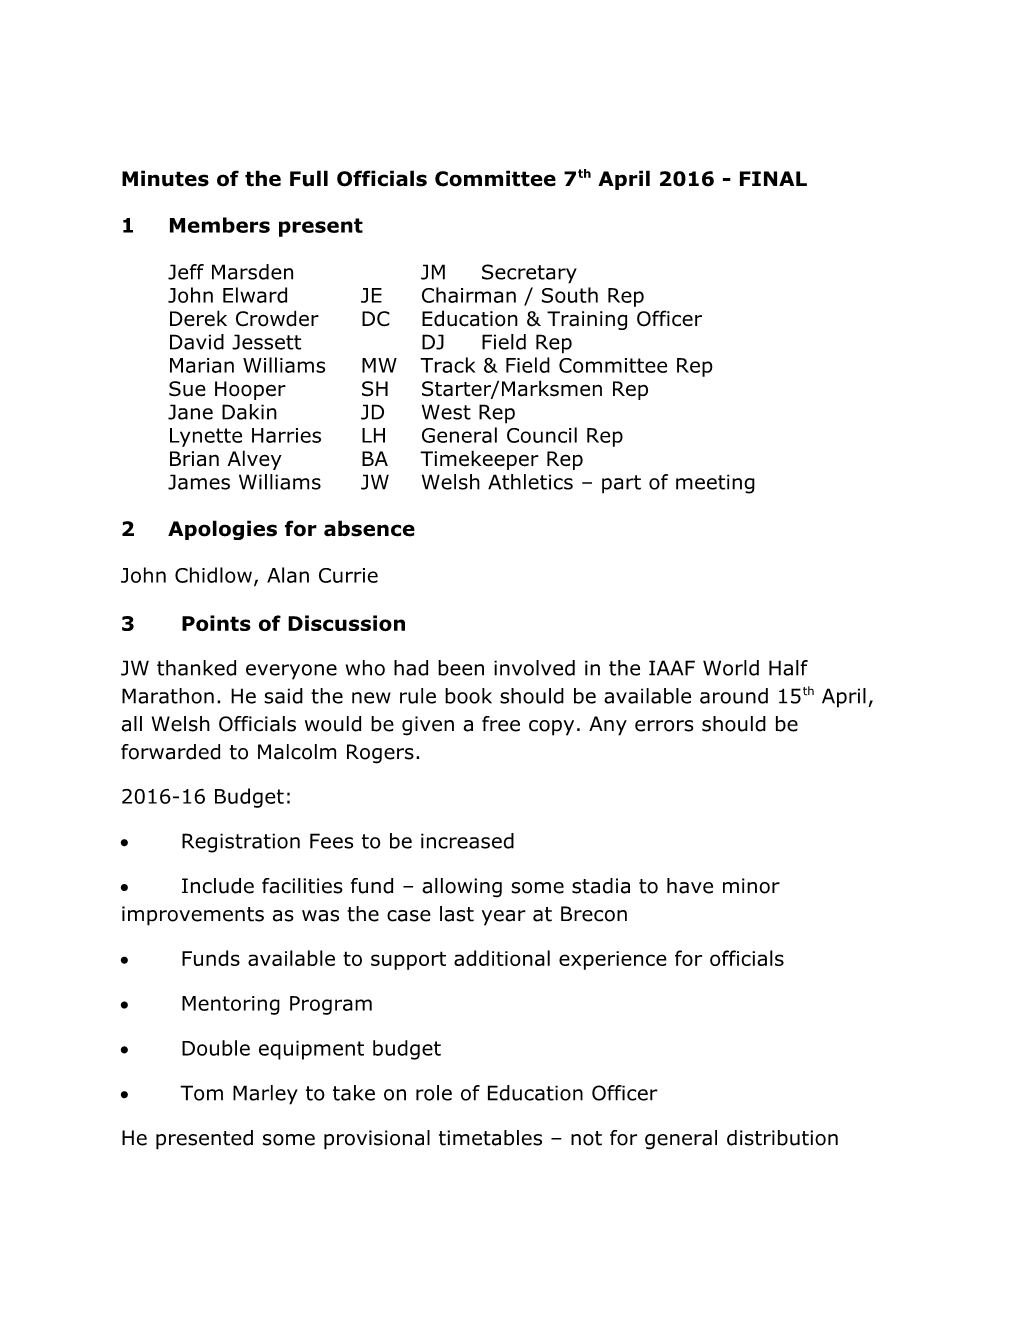 Minutes of the Full Officials Committee 7Th April 2016 - FINAL